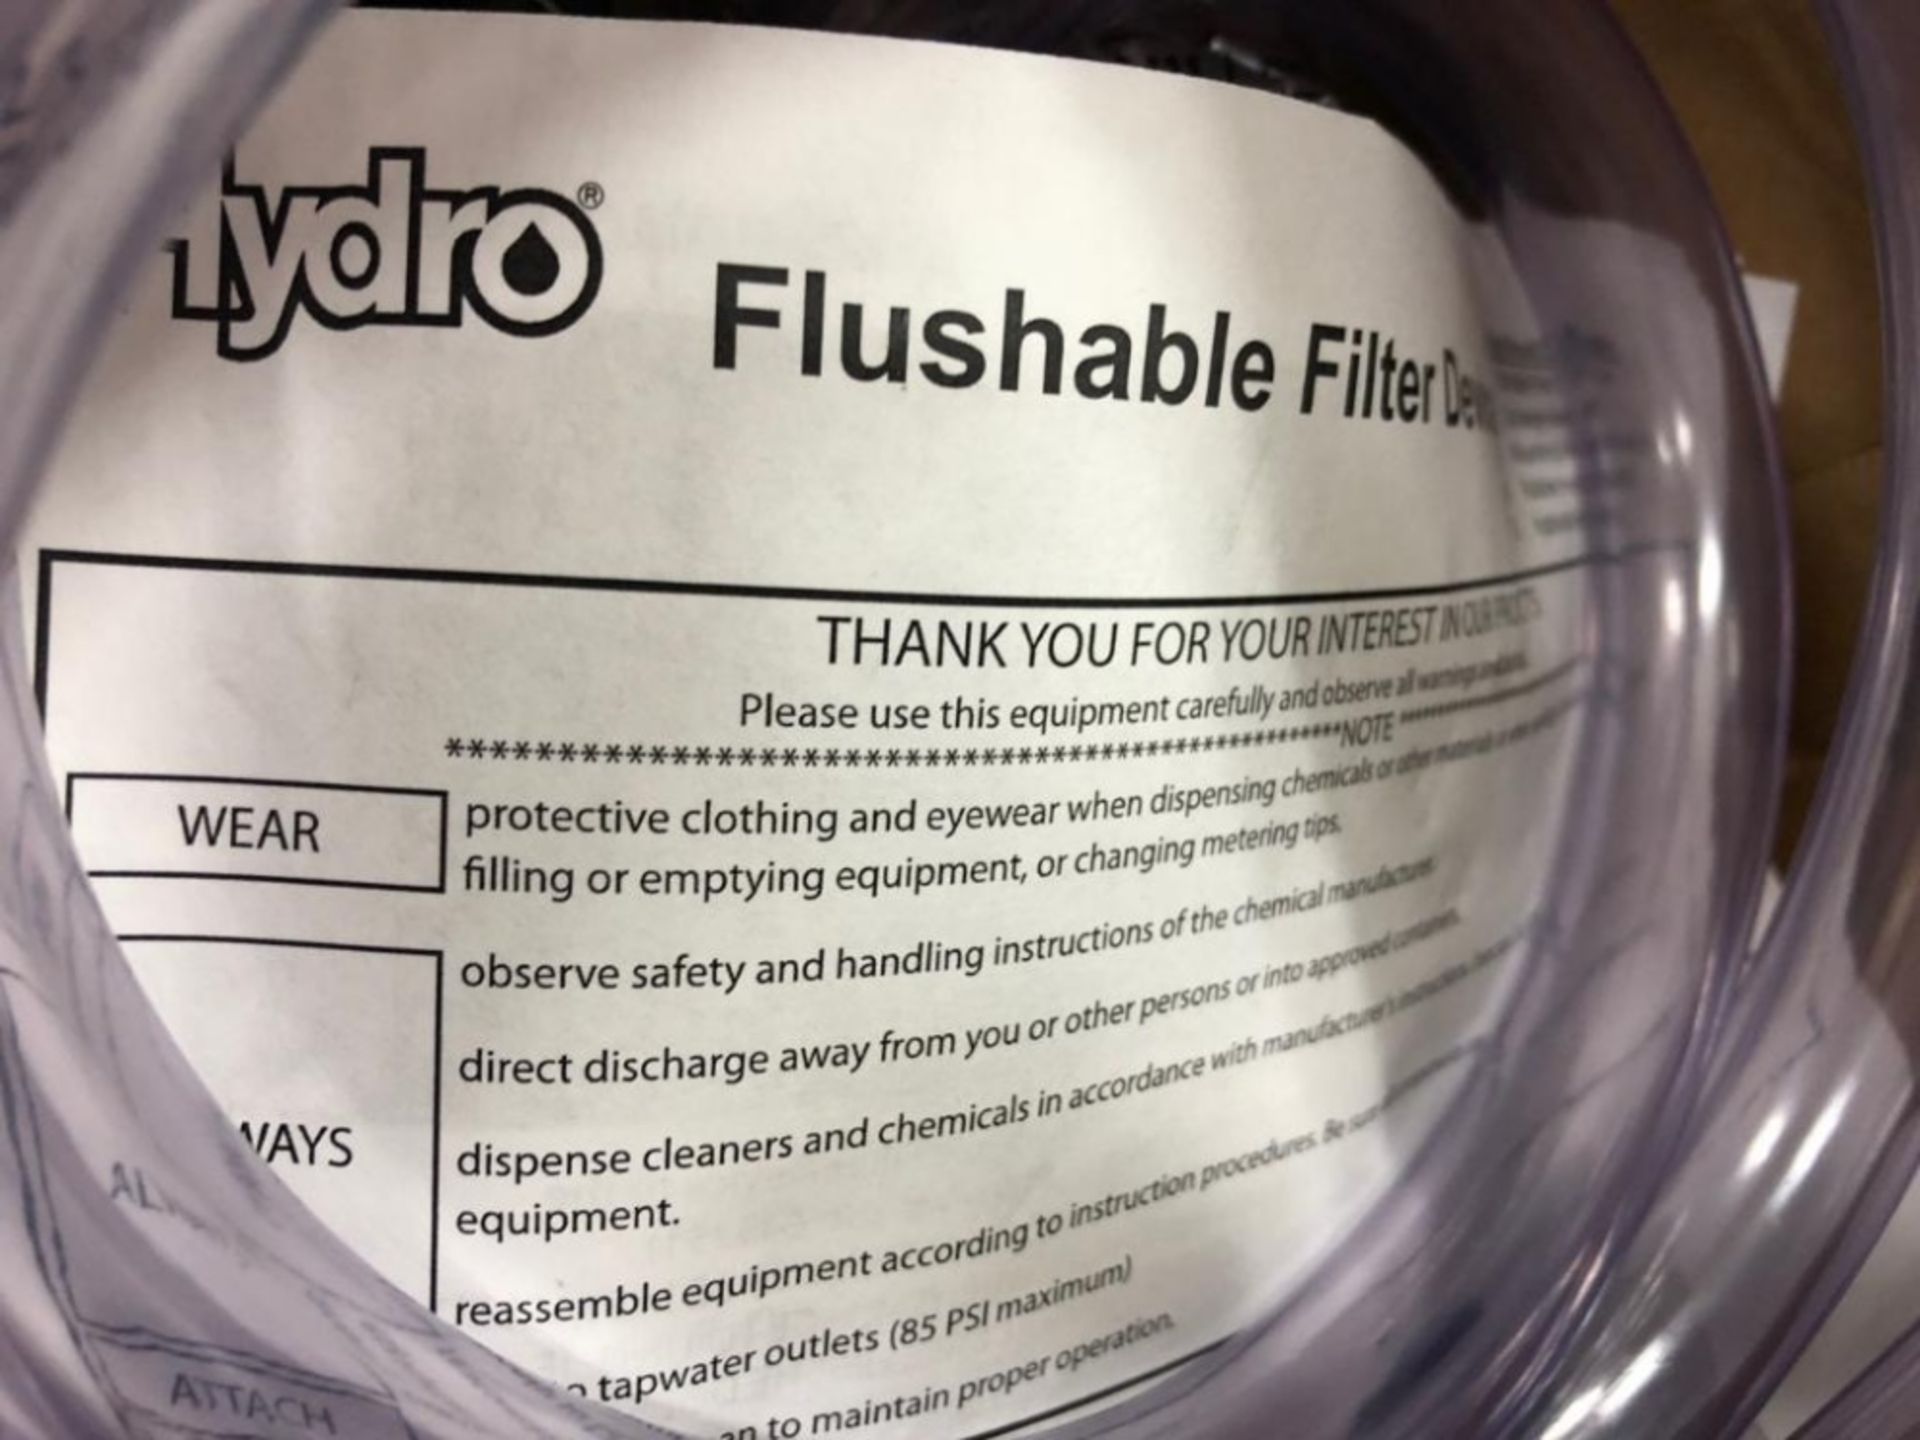 Ninteen (19) Hydro Systems flushable filters - Image 2 of 2